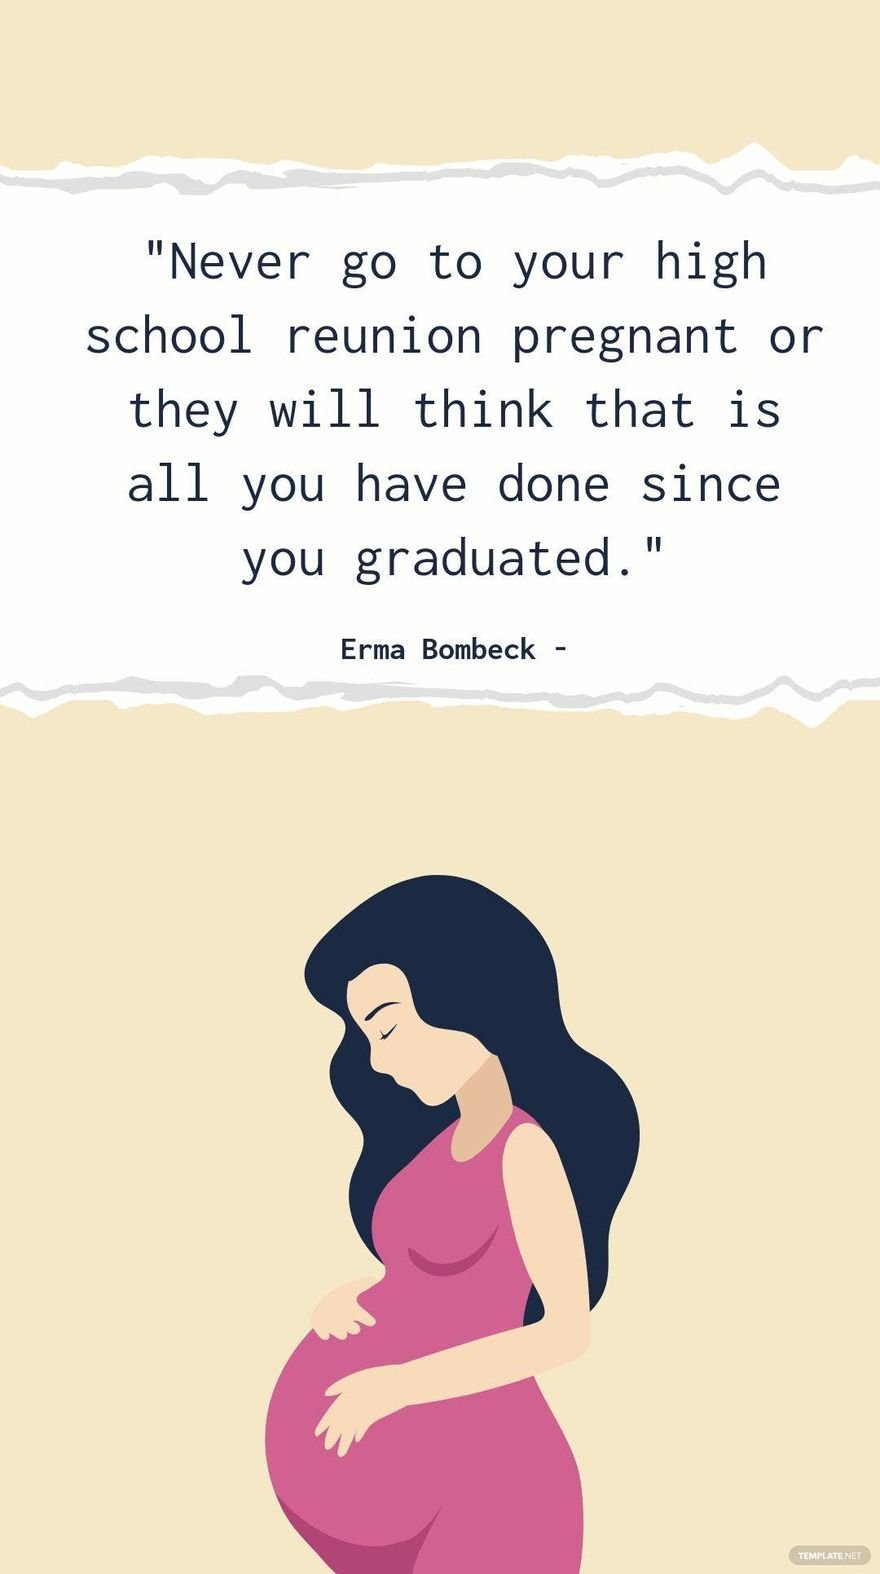 Erma Bombeck - Never go to your high school reunion pregnant or they will think that is all you have done since you graduated.